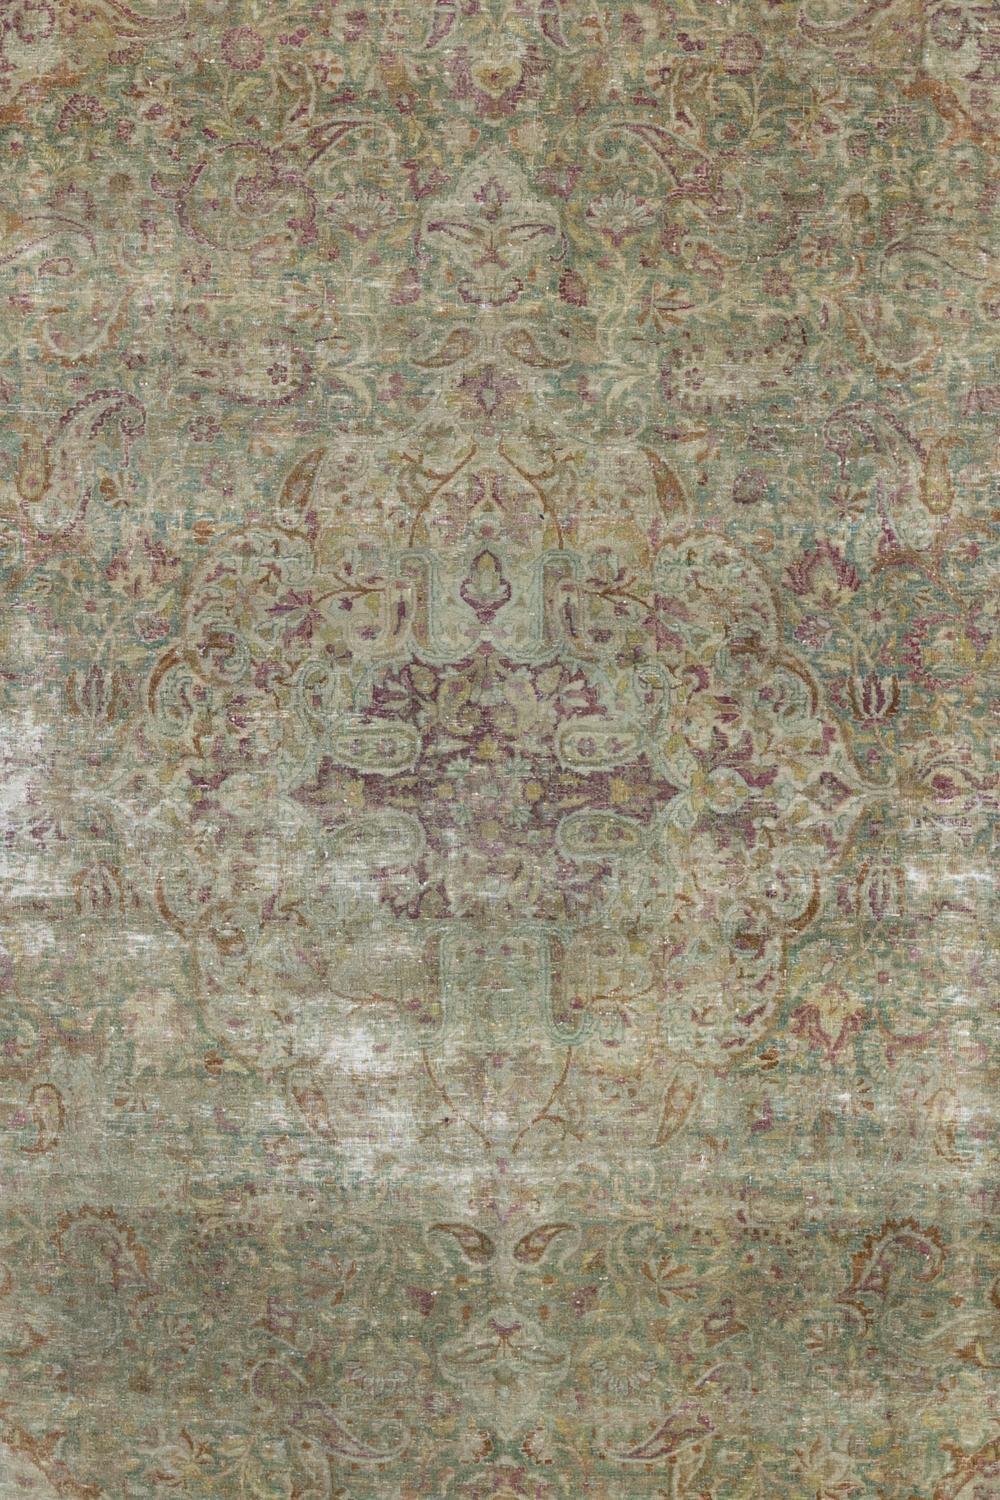 Age: Circa 1940

Colors: Wine Berry and Sand dune in a Moss field. 

Pile: Low.

Material: Wool, cotton.

Lovely silky wool in a silvery green tone with pops of wine berry. 

Vintage rugs are made by hand over the course of months,